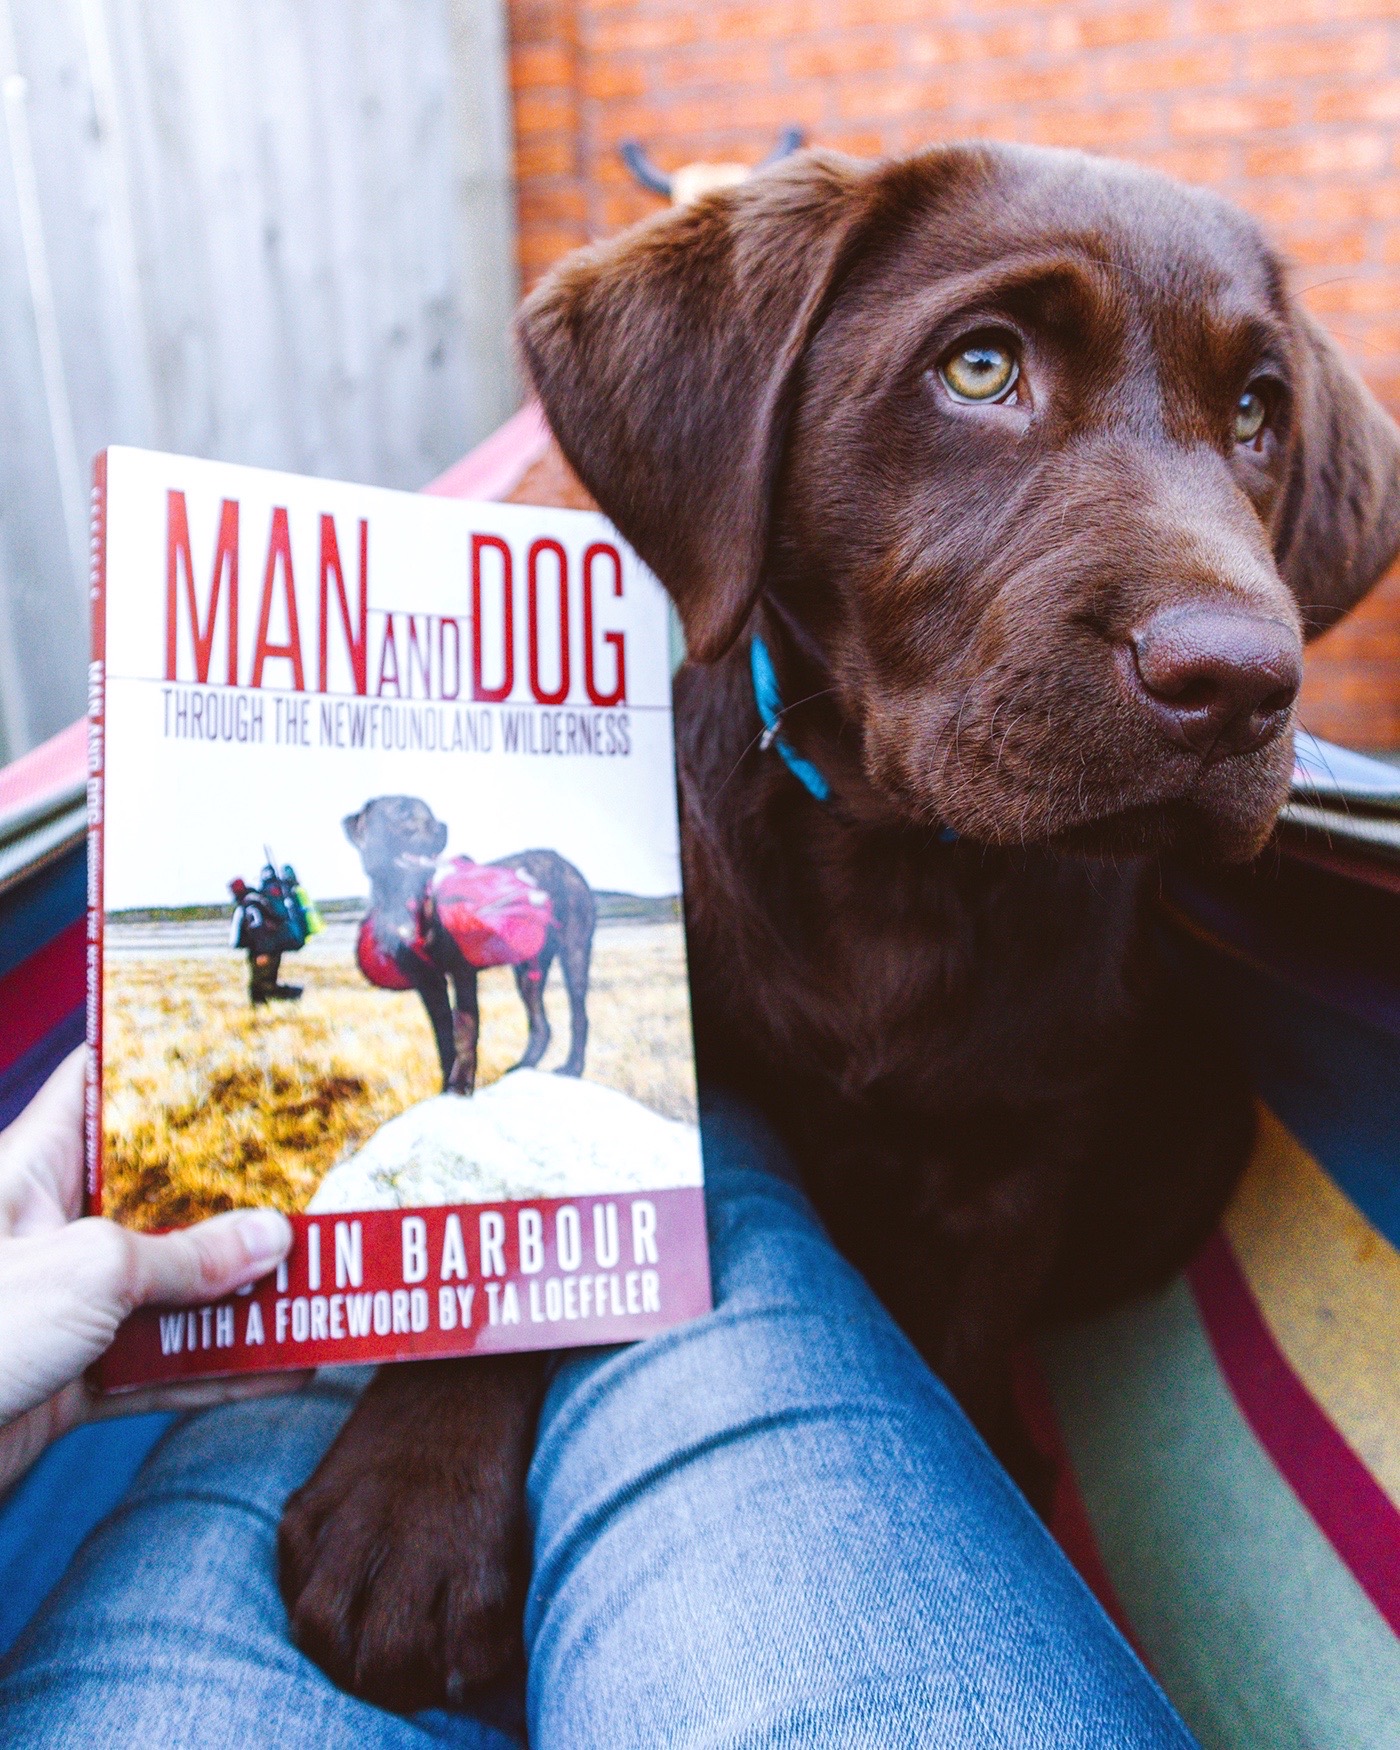 Woman and dog read Justin Barbour's Man and Dog: Through the Newfoundland Wilderness